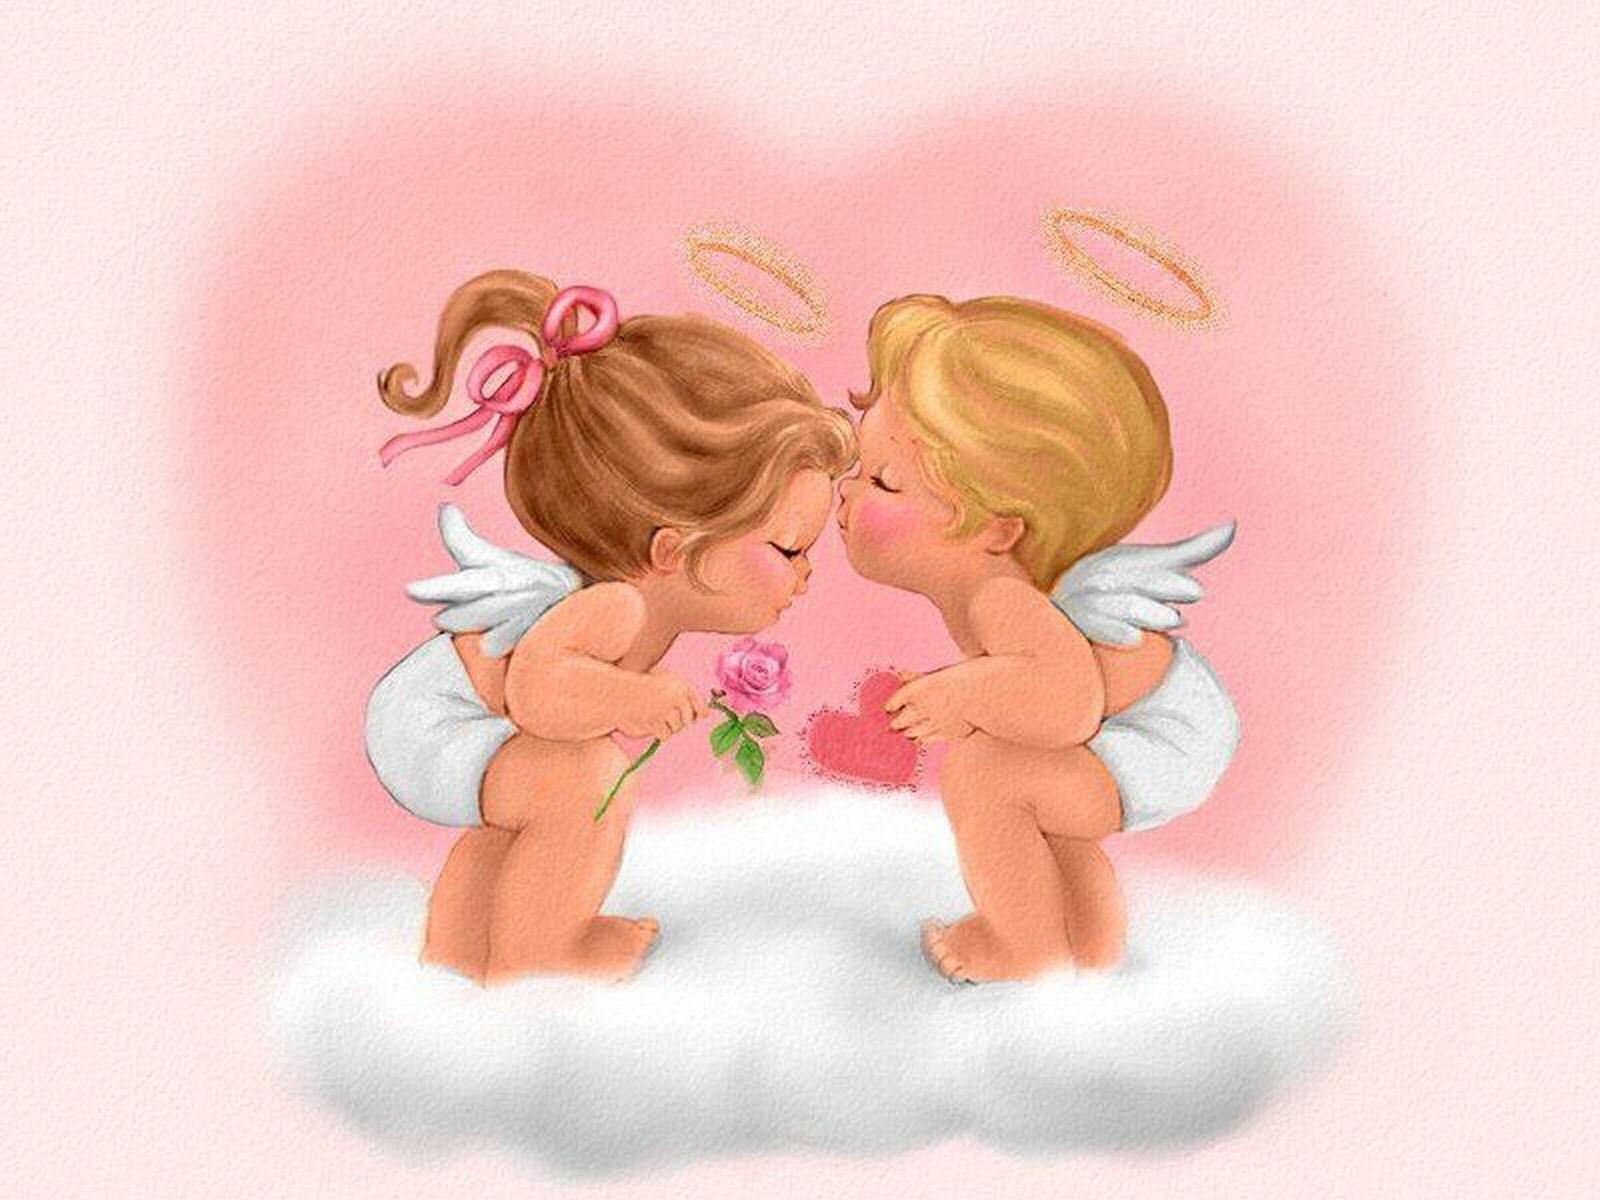 angels kiss day, Valentines day greetings